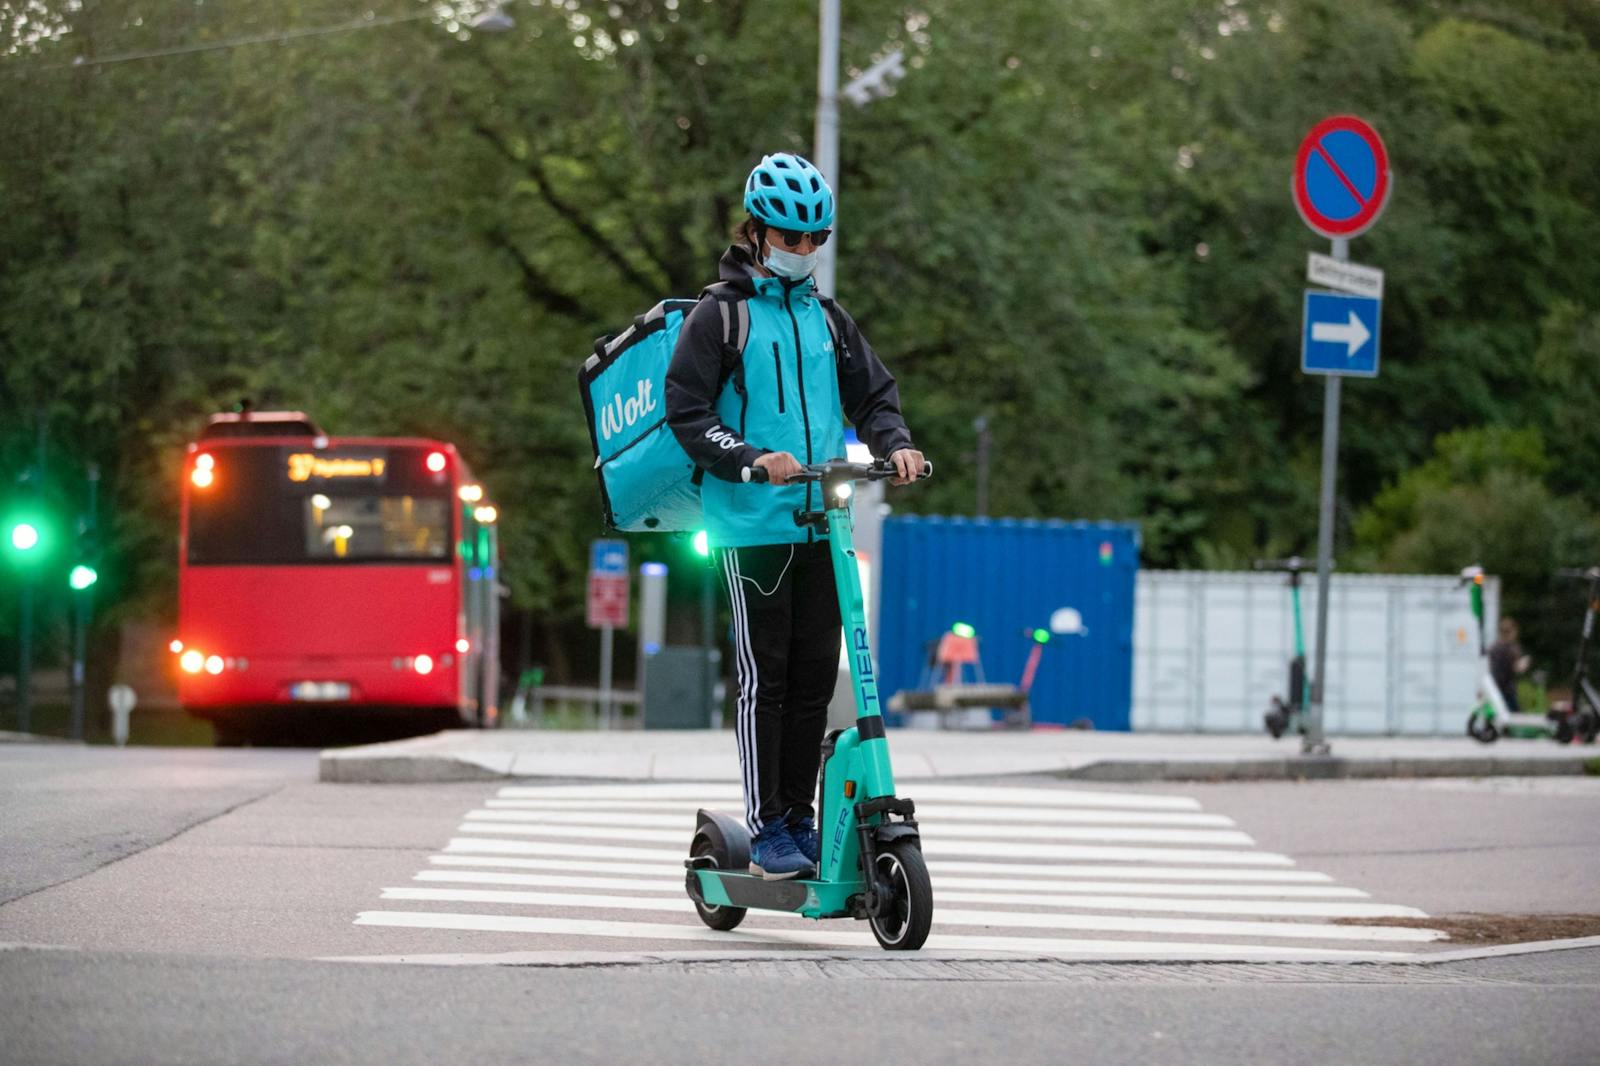 A Wolt delivery courier in Norway in August. Photo by Bloomberg.